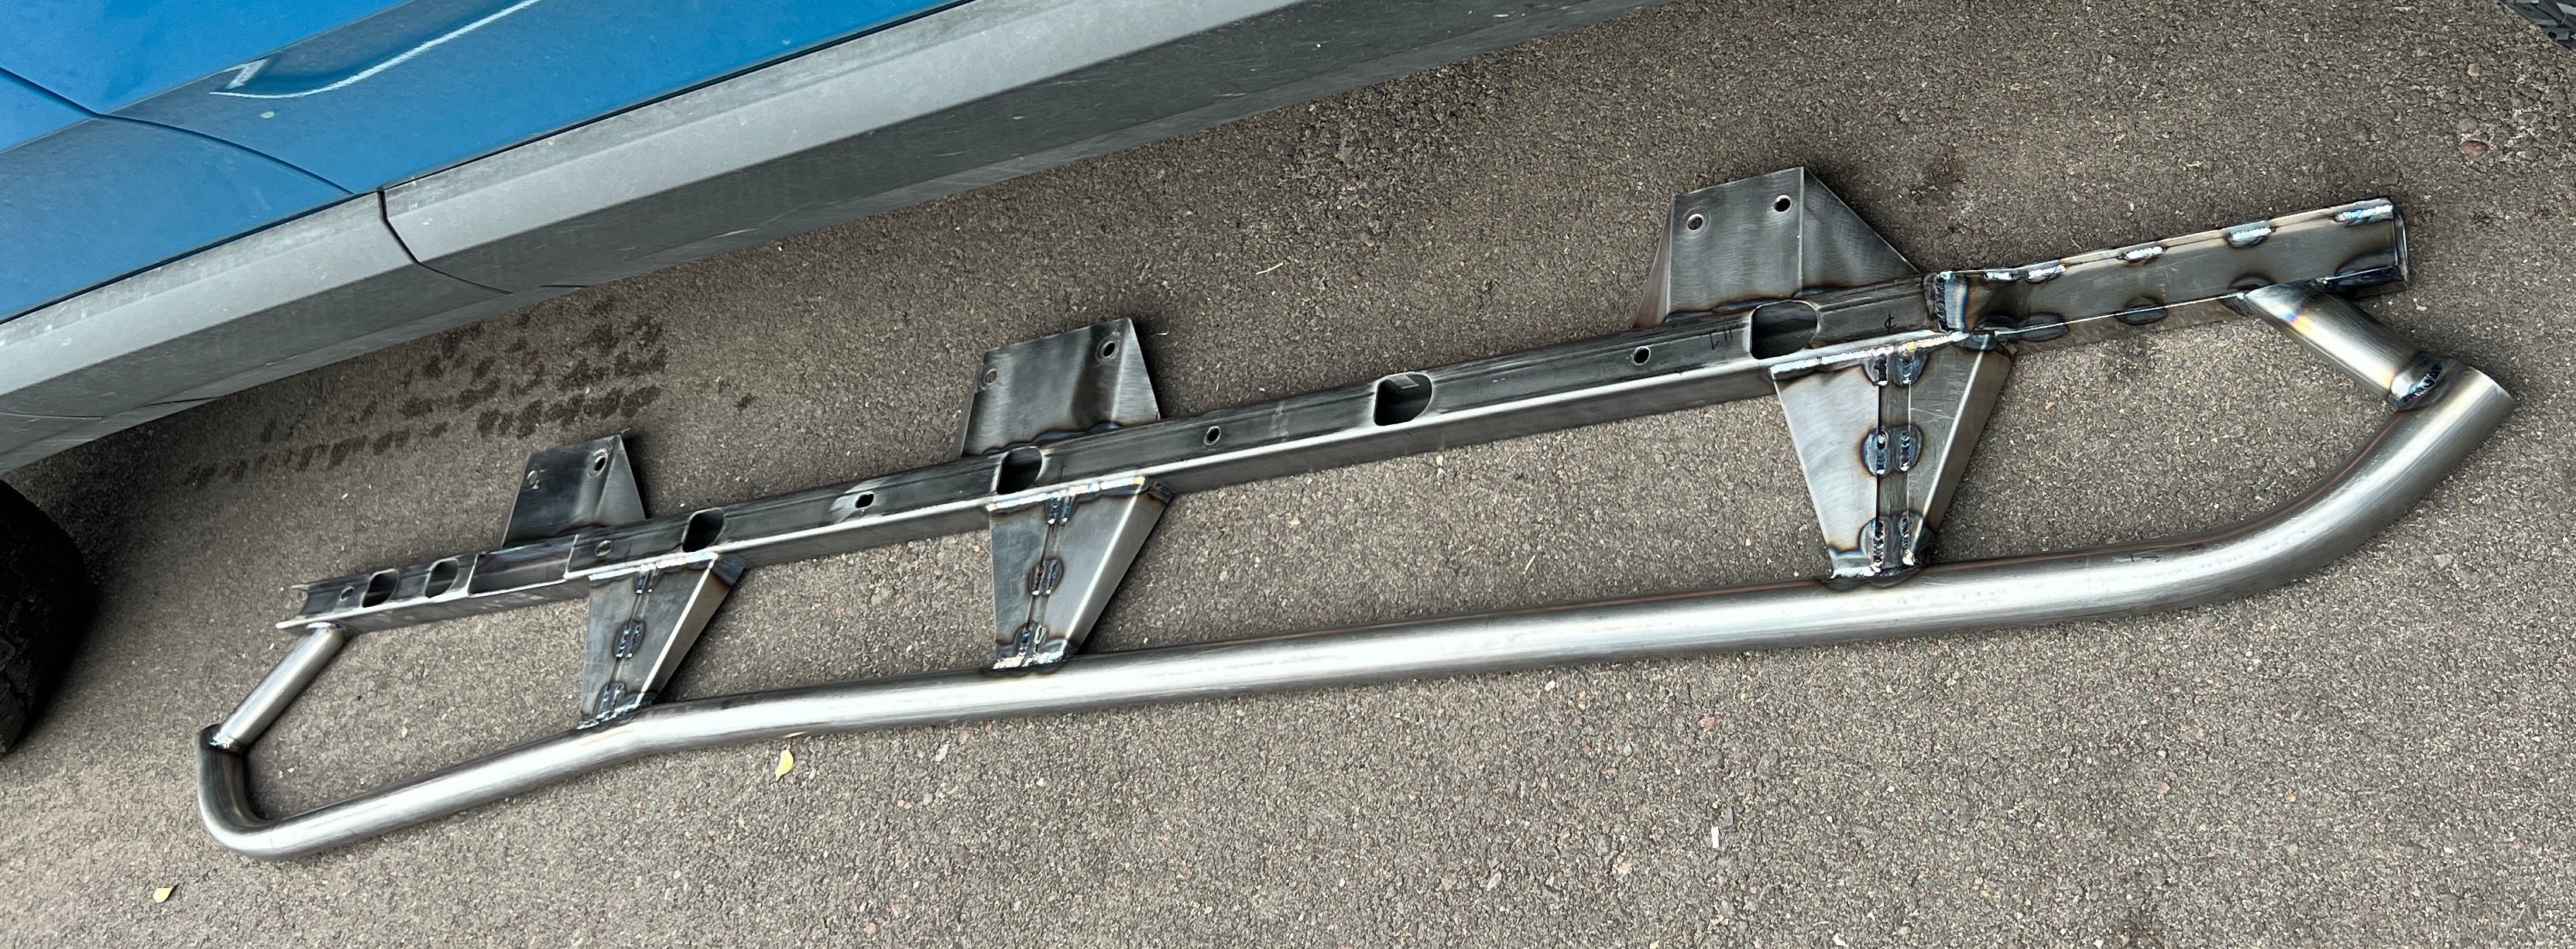 What's the difference between a rock slider and a running board / step?